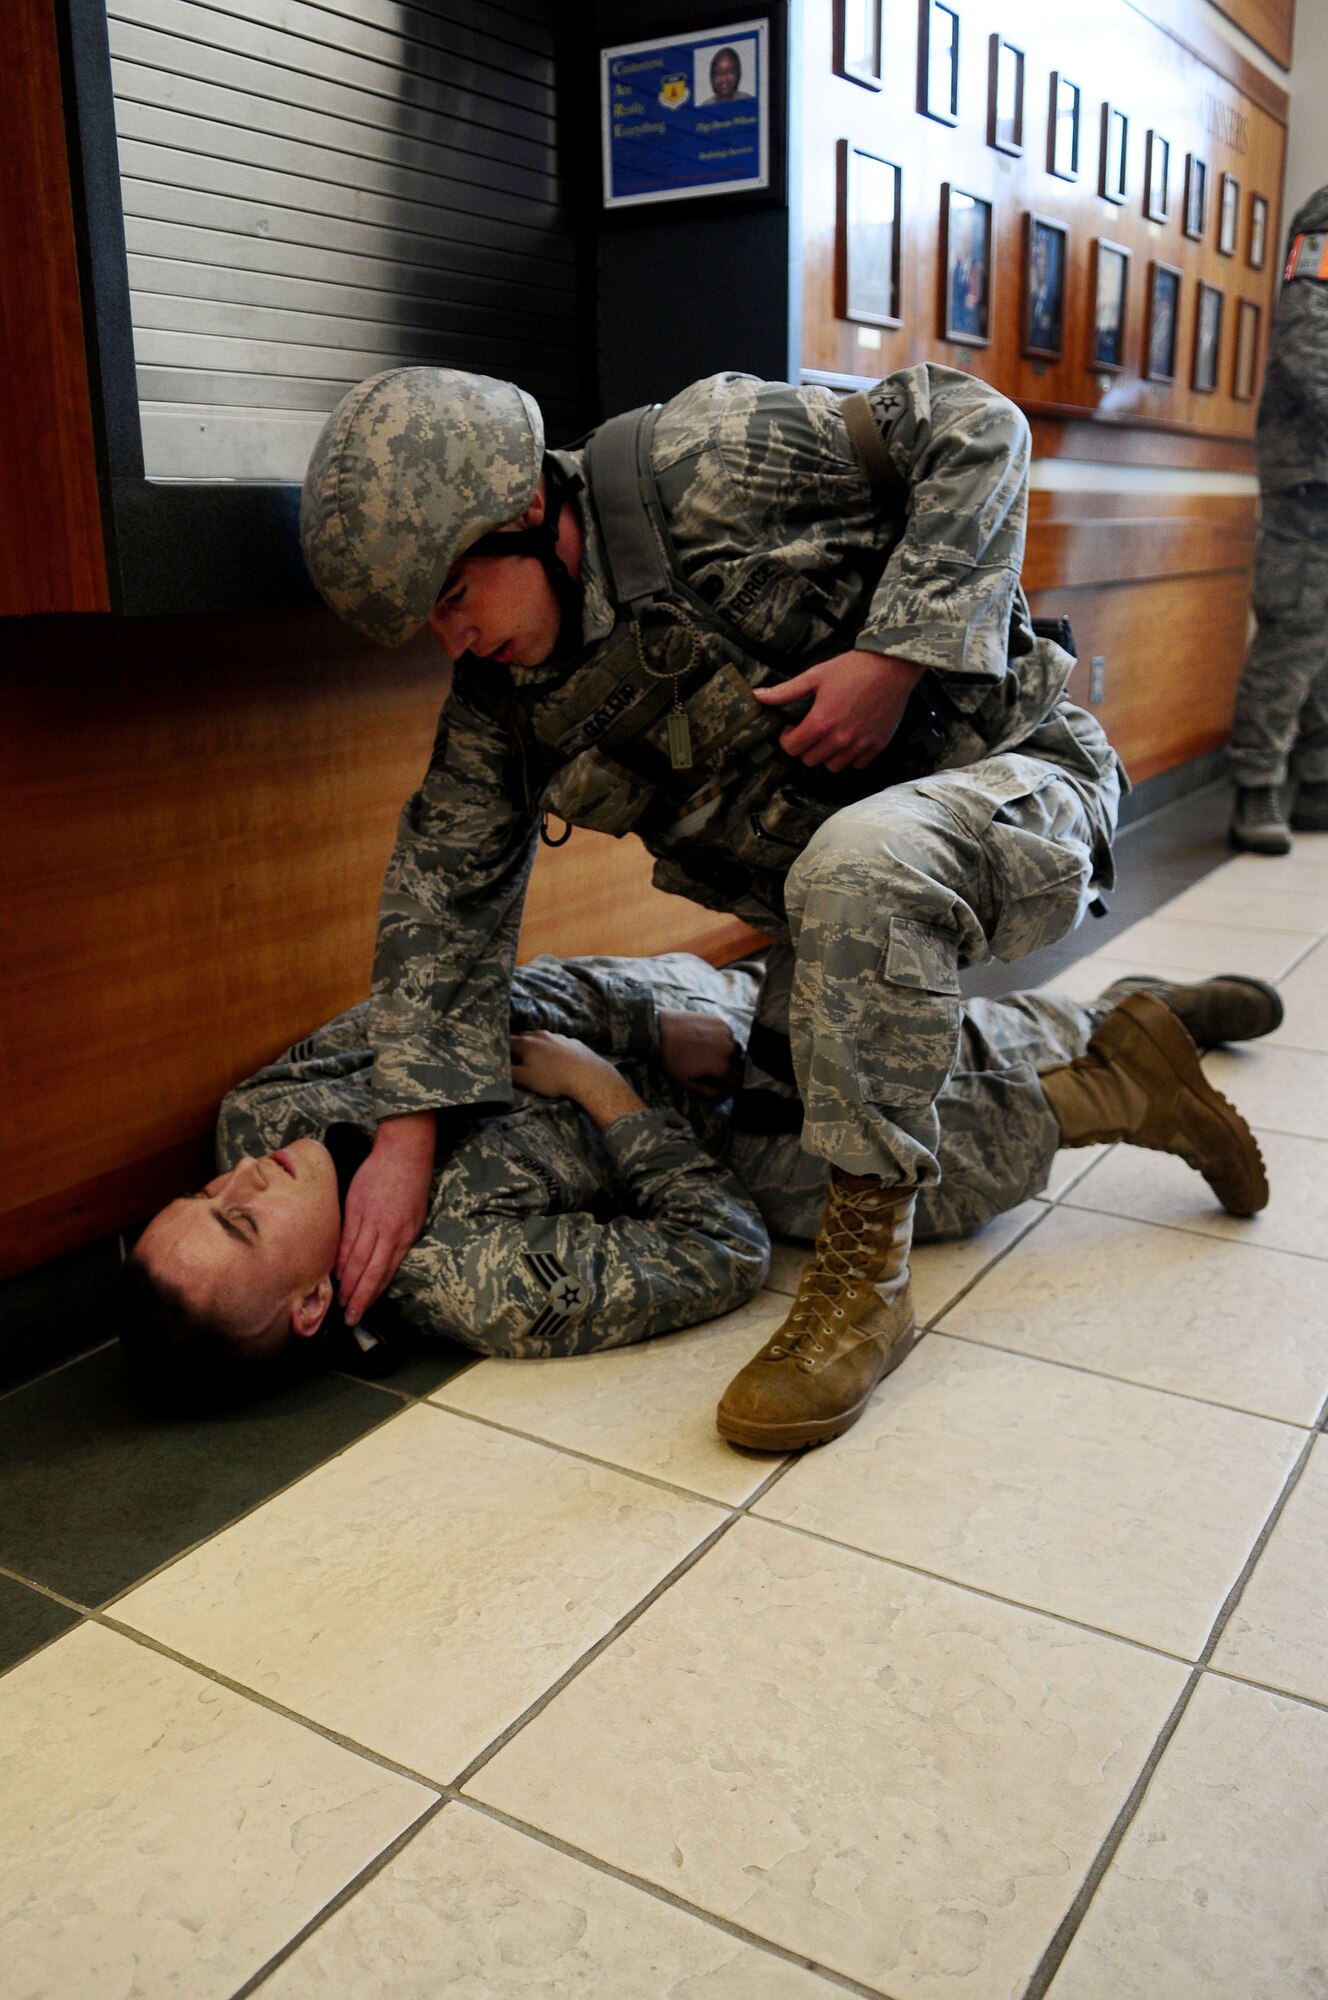 Senior Airman Christopher Gallup from the 36th Security Forces Squadron administers first aid to a role player during an active shooter exercise at Andersen Air Force Base, Jan. 12. The exercise tested first responders as well as medical group personnel on their response in the event of an active shooter. (U.S. Air Force photo/Airman 1st Class Jeffrey Schultze)